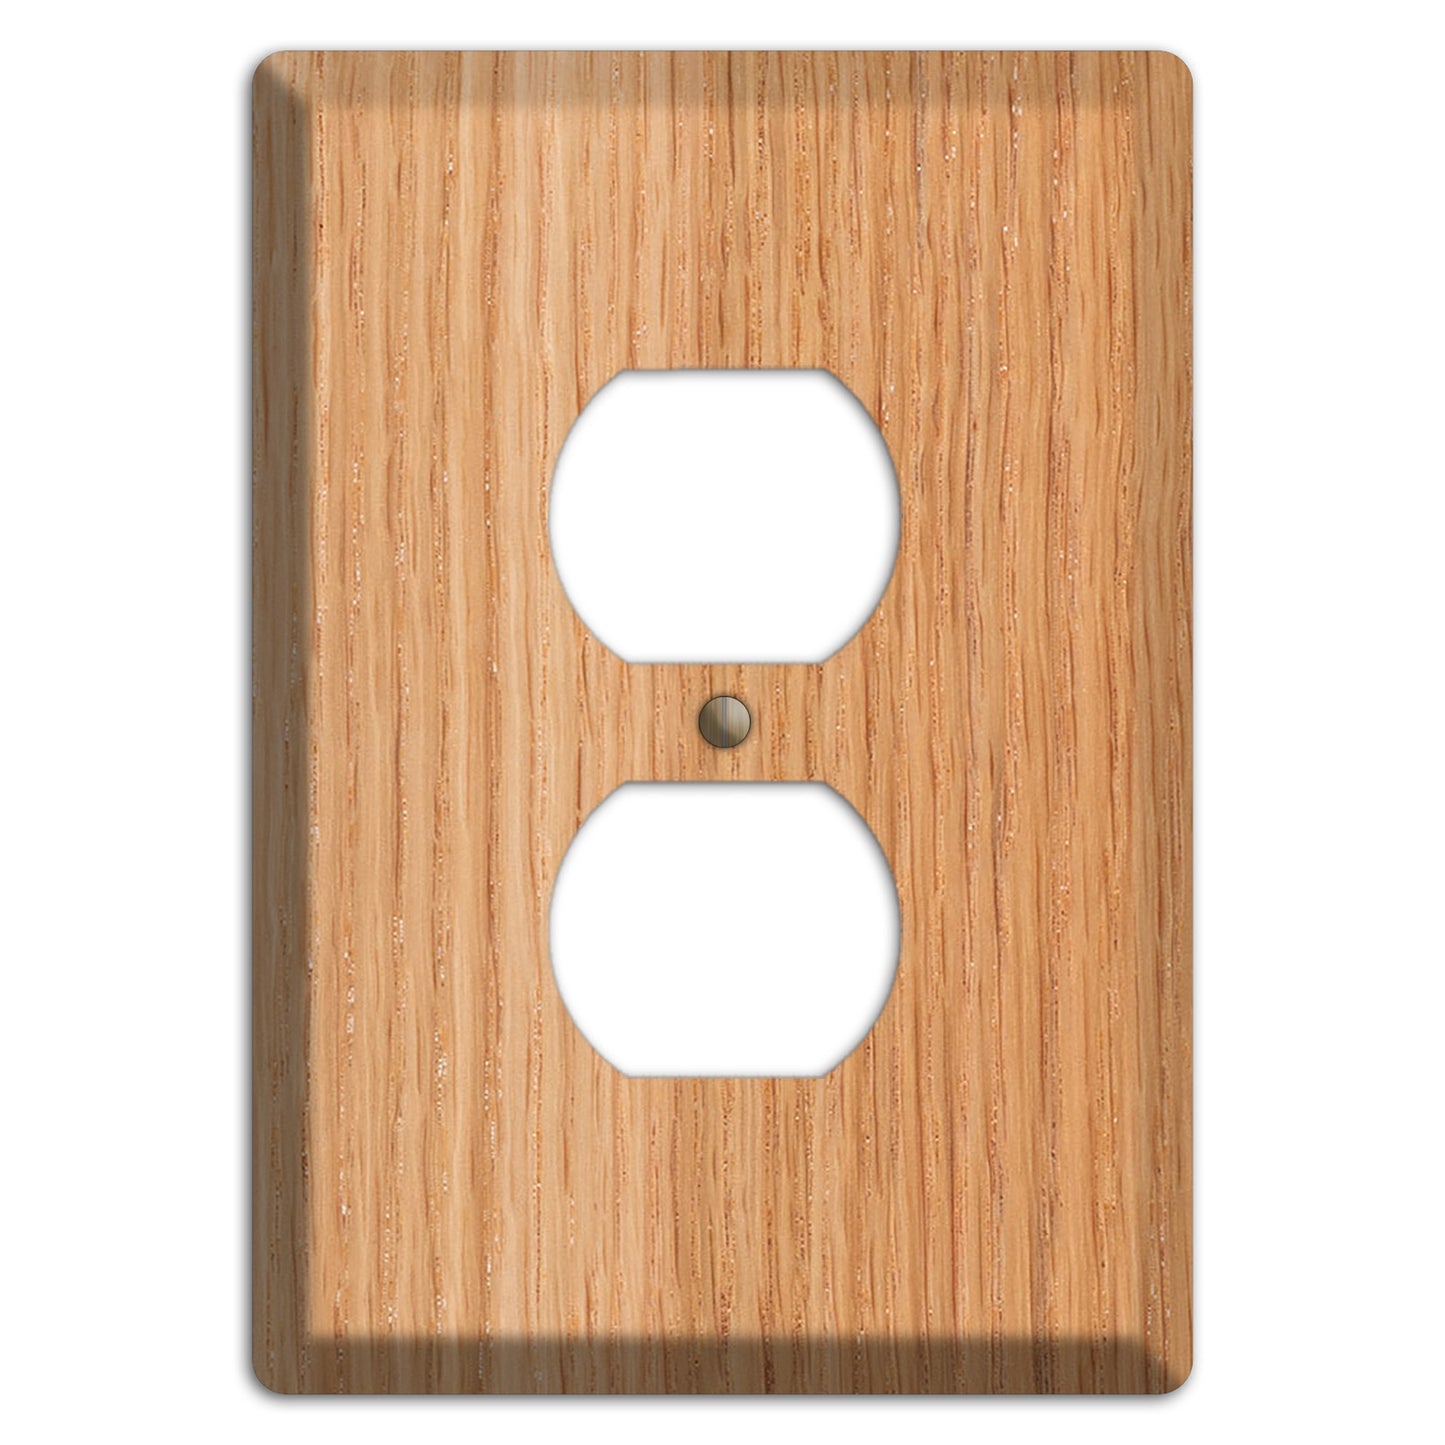 Unfinished Red Oak Wood Duplex Outlet Cover Plate